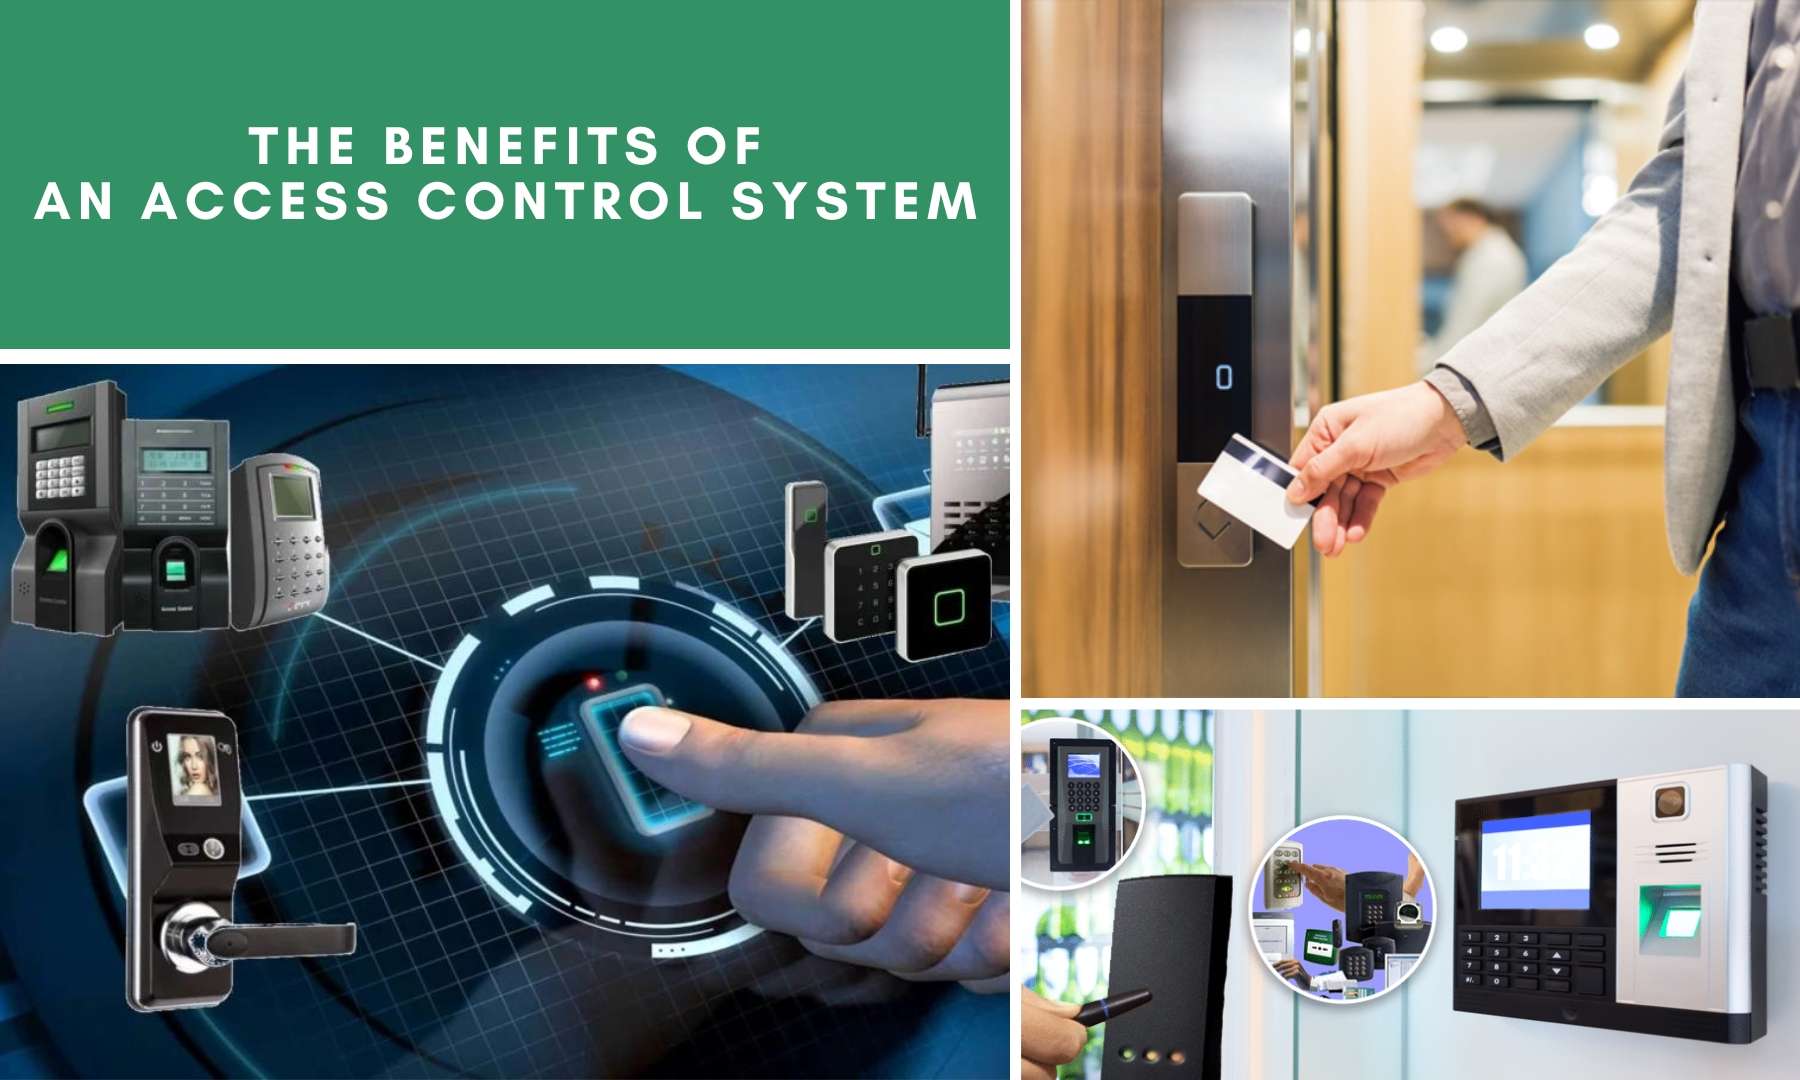 The Benefits of an Access Control